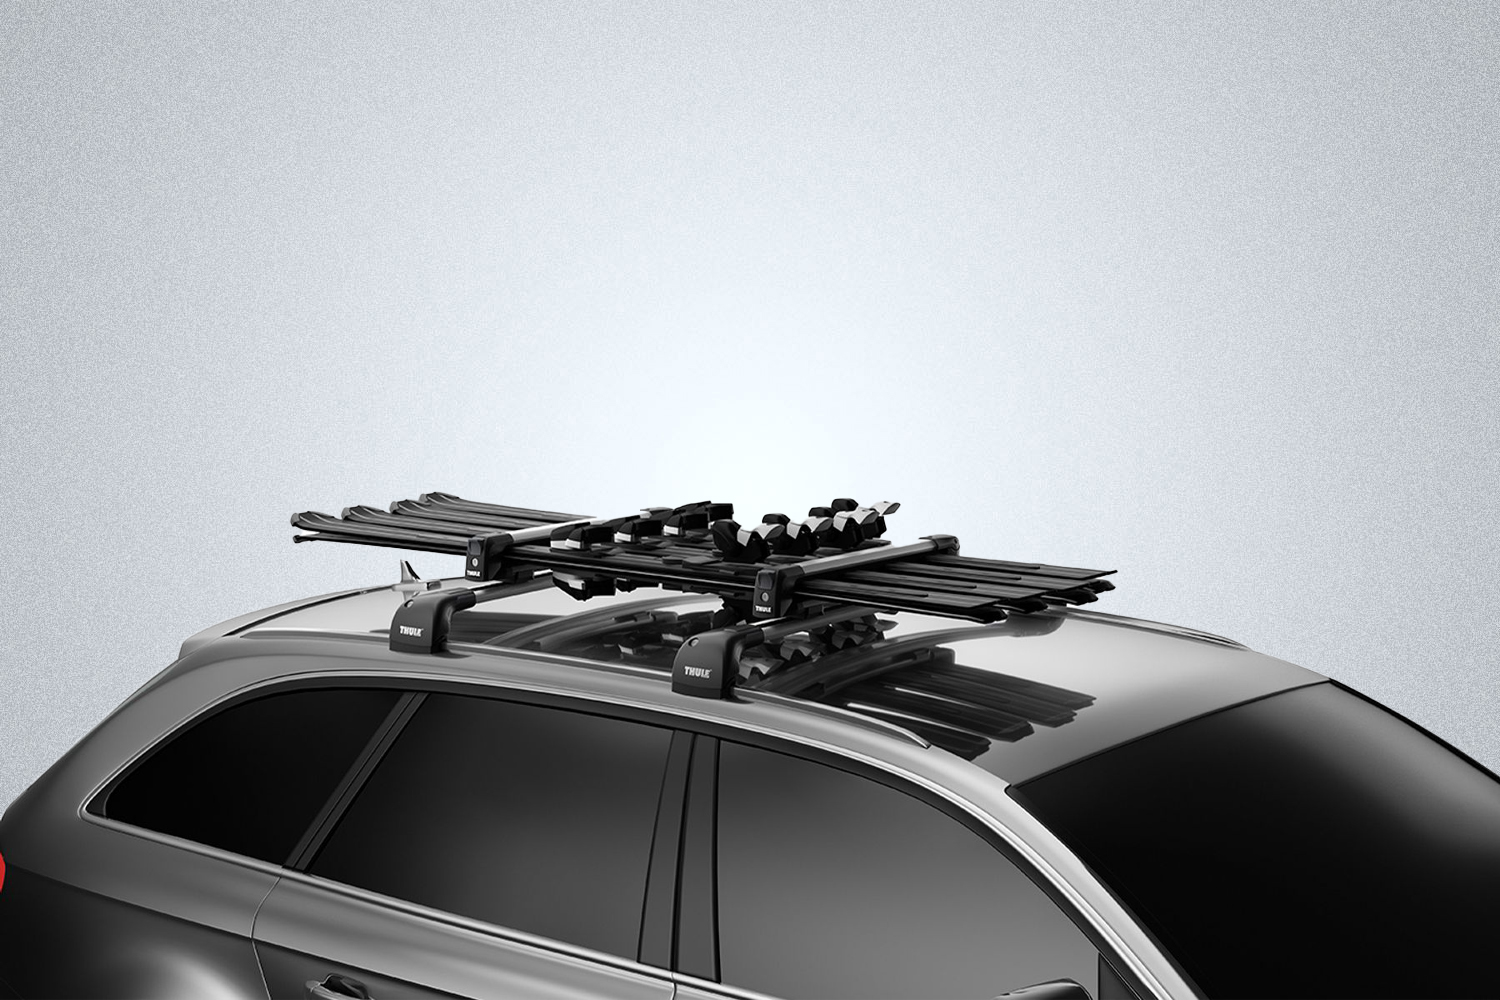 The Thule SnowPack is a great roof rack to store skis and snowboards in winter of 2022